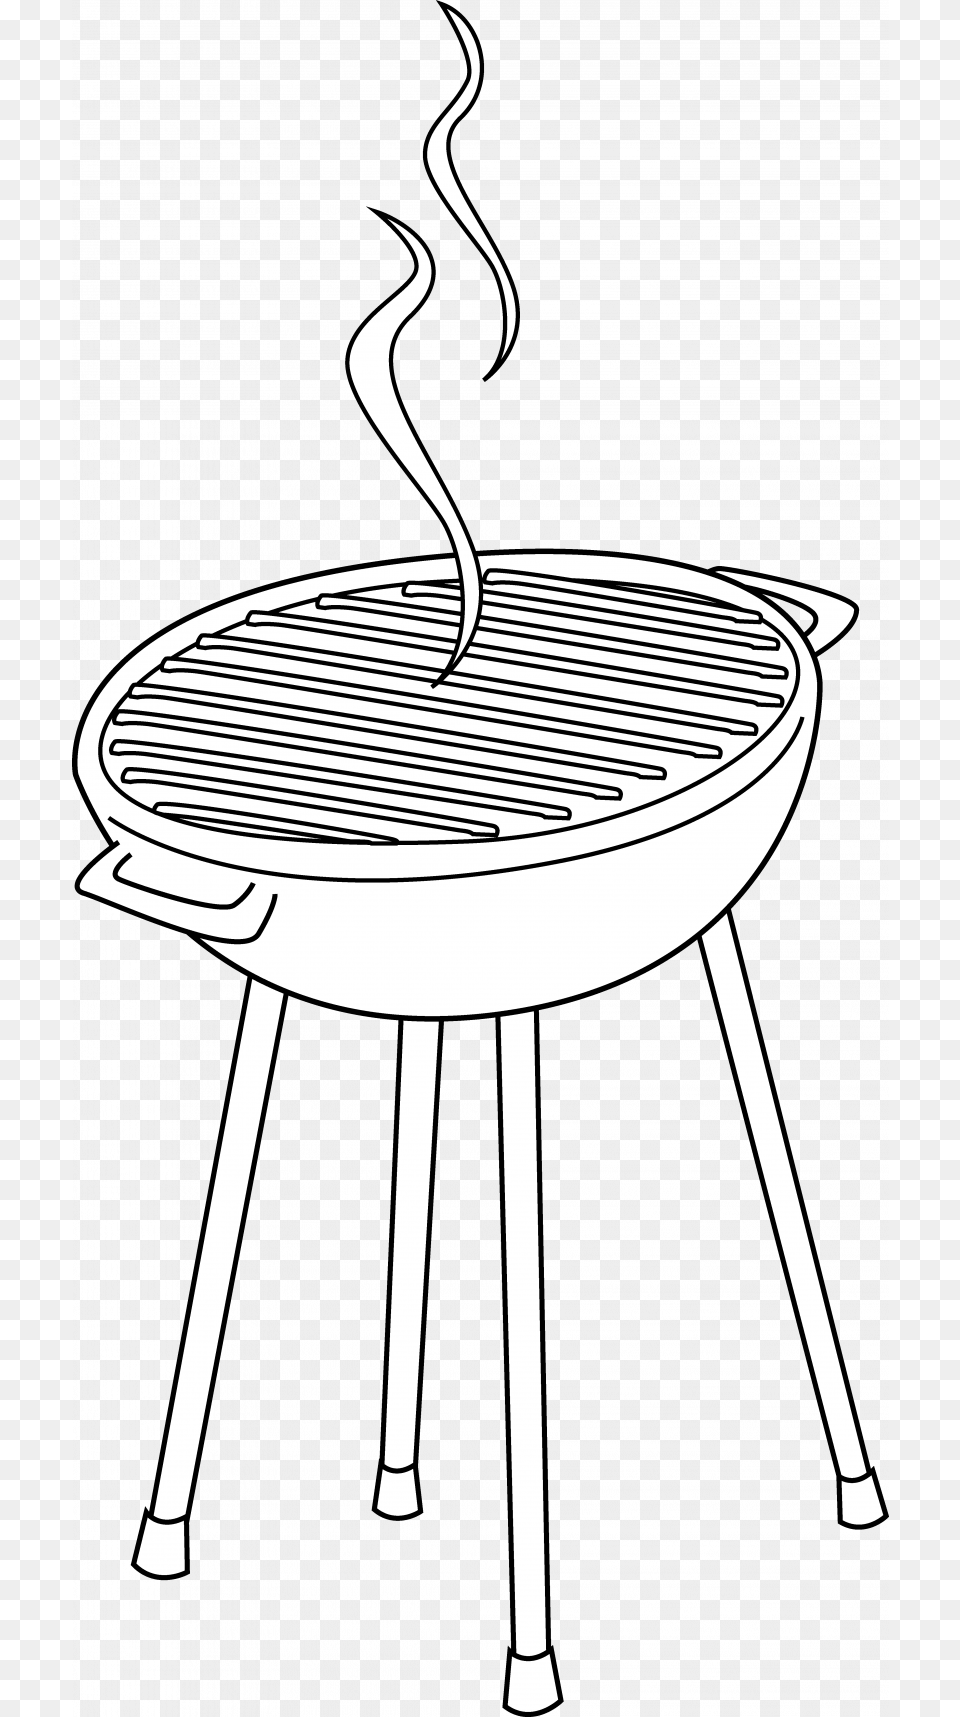 Barbeque Grill Clip Art Barbecue Grill Clipart Black And White, Bbq, Cooking, Food, Grilling Free Png Download